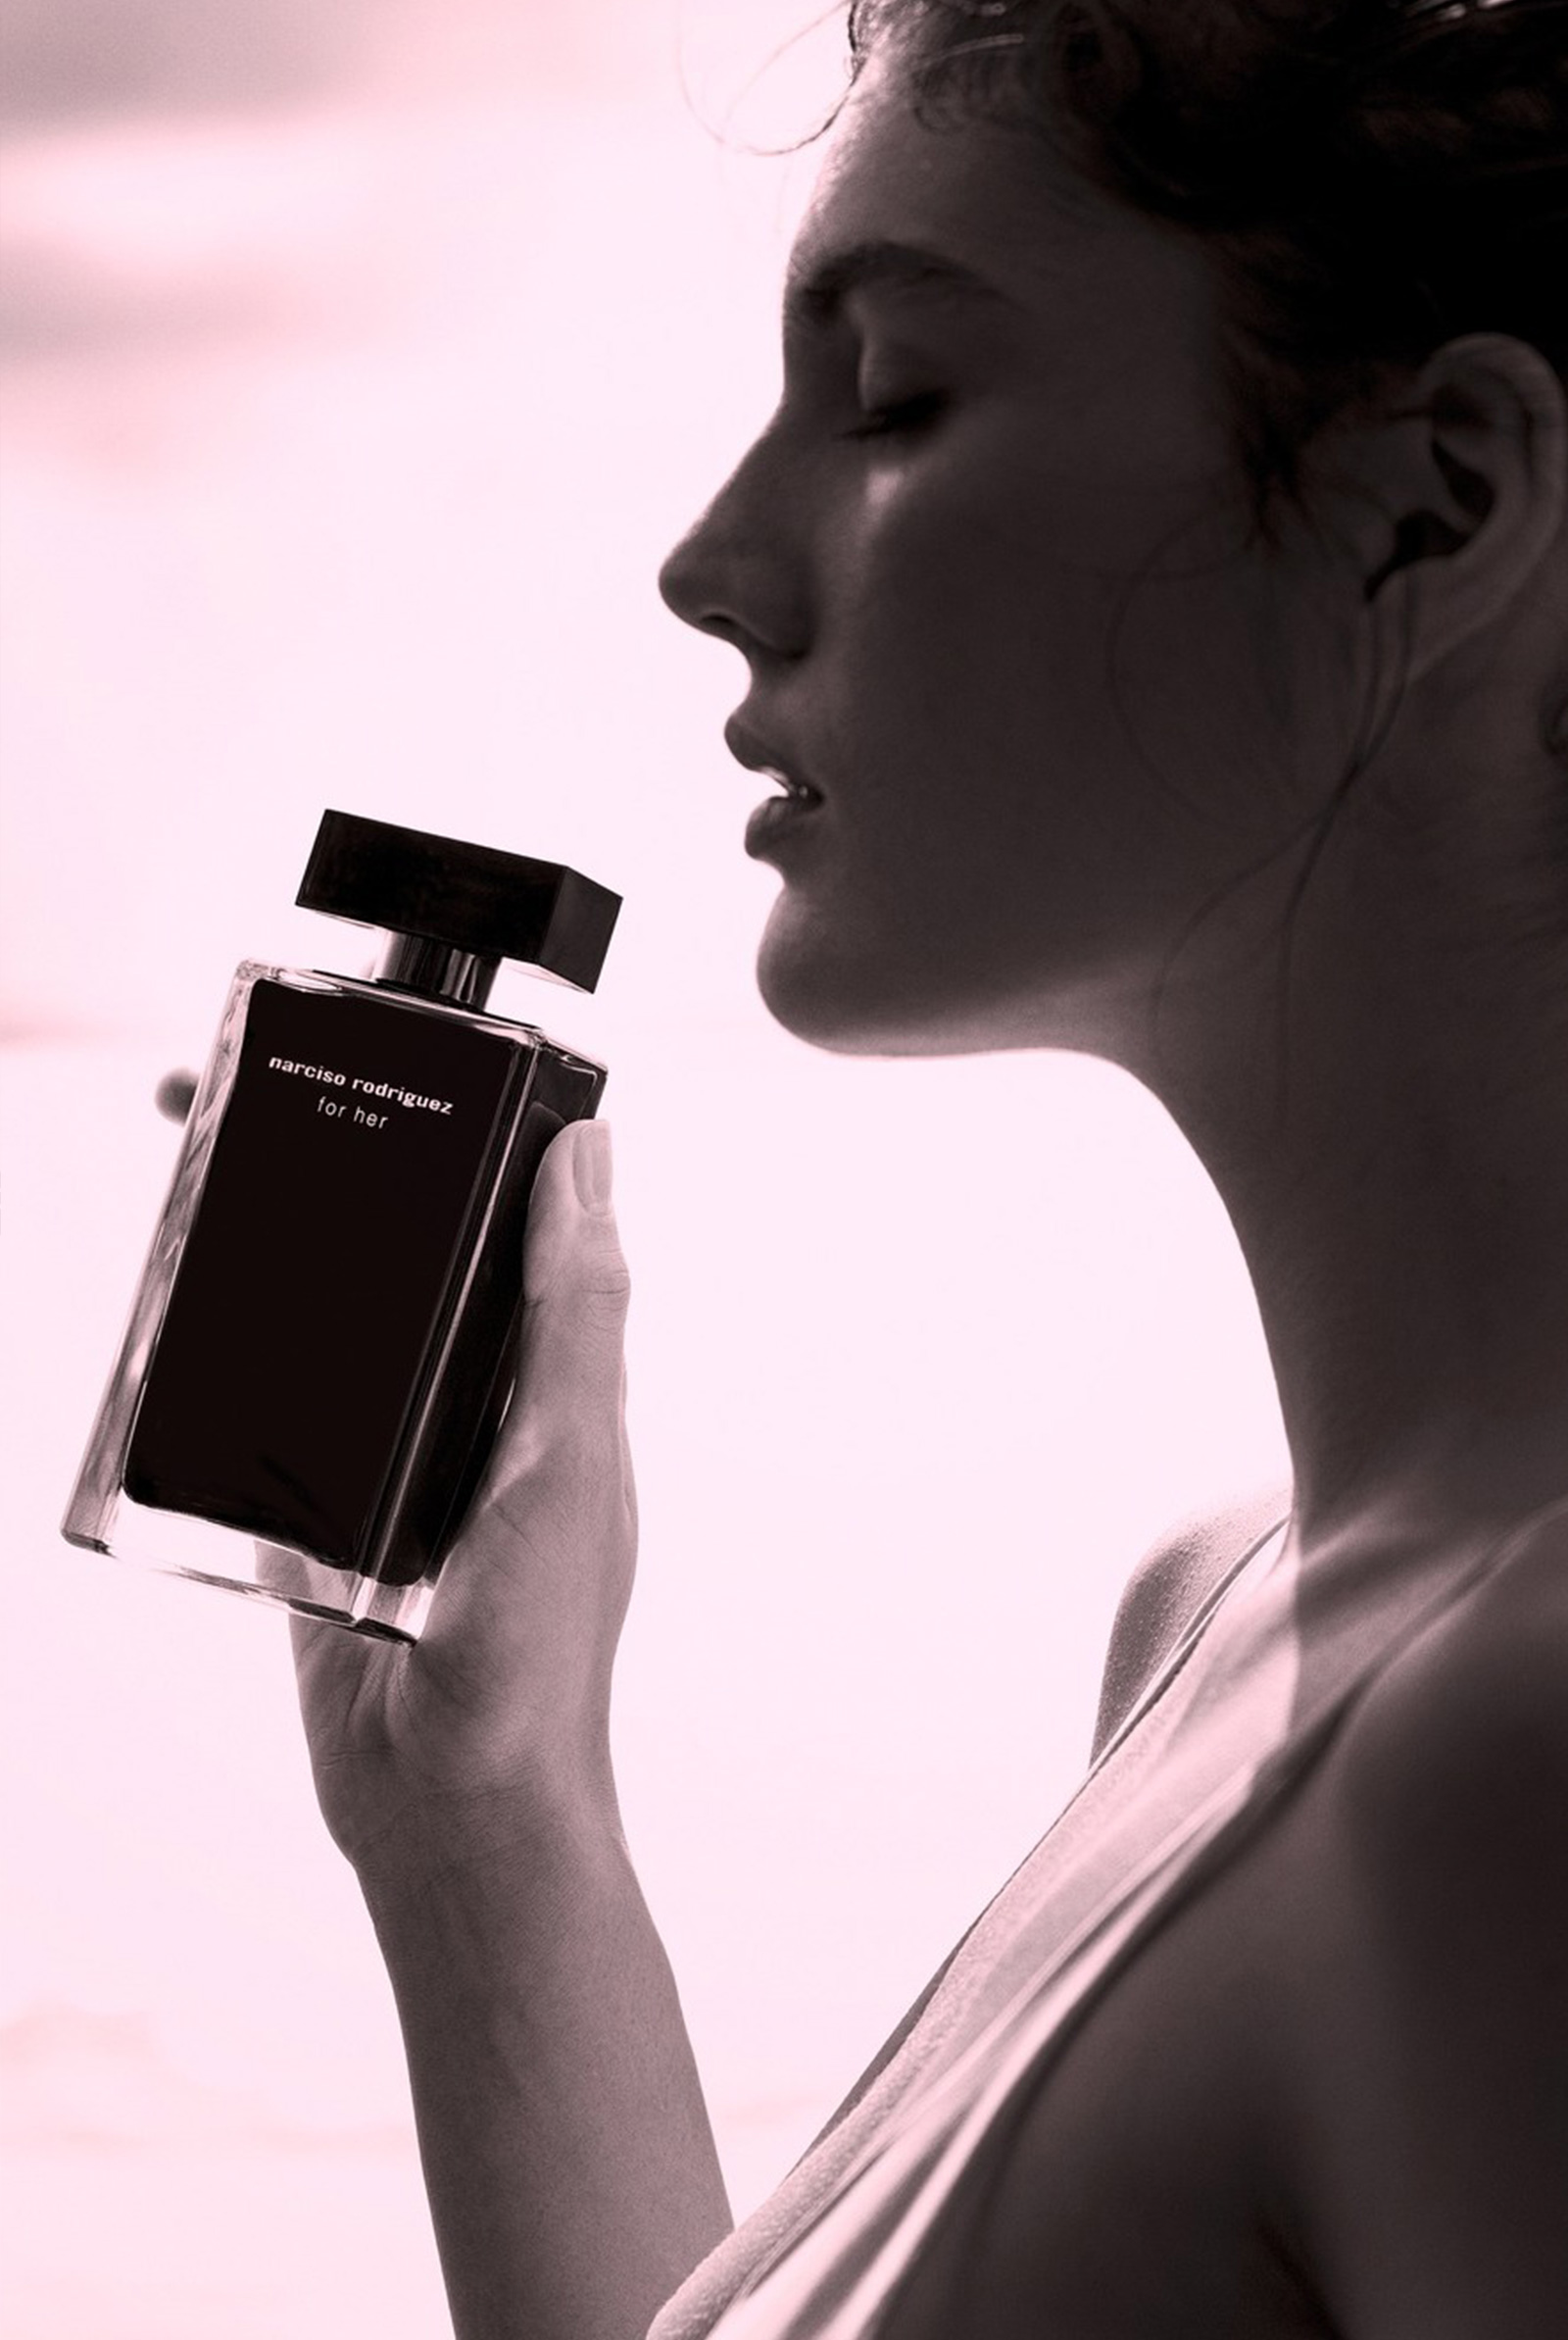 Narciso Rodriguez for her forever